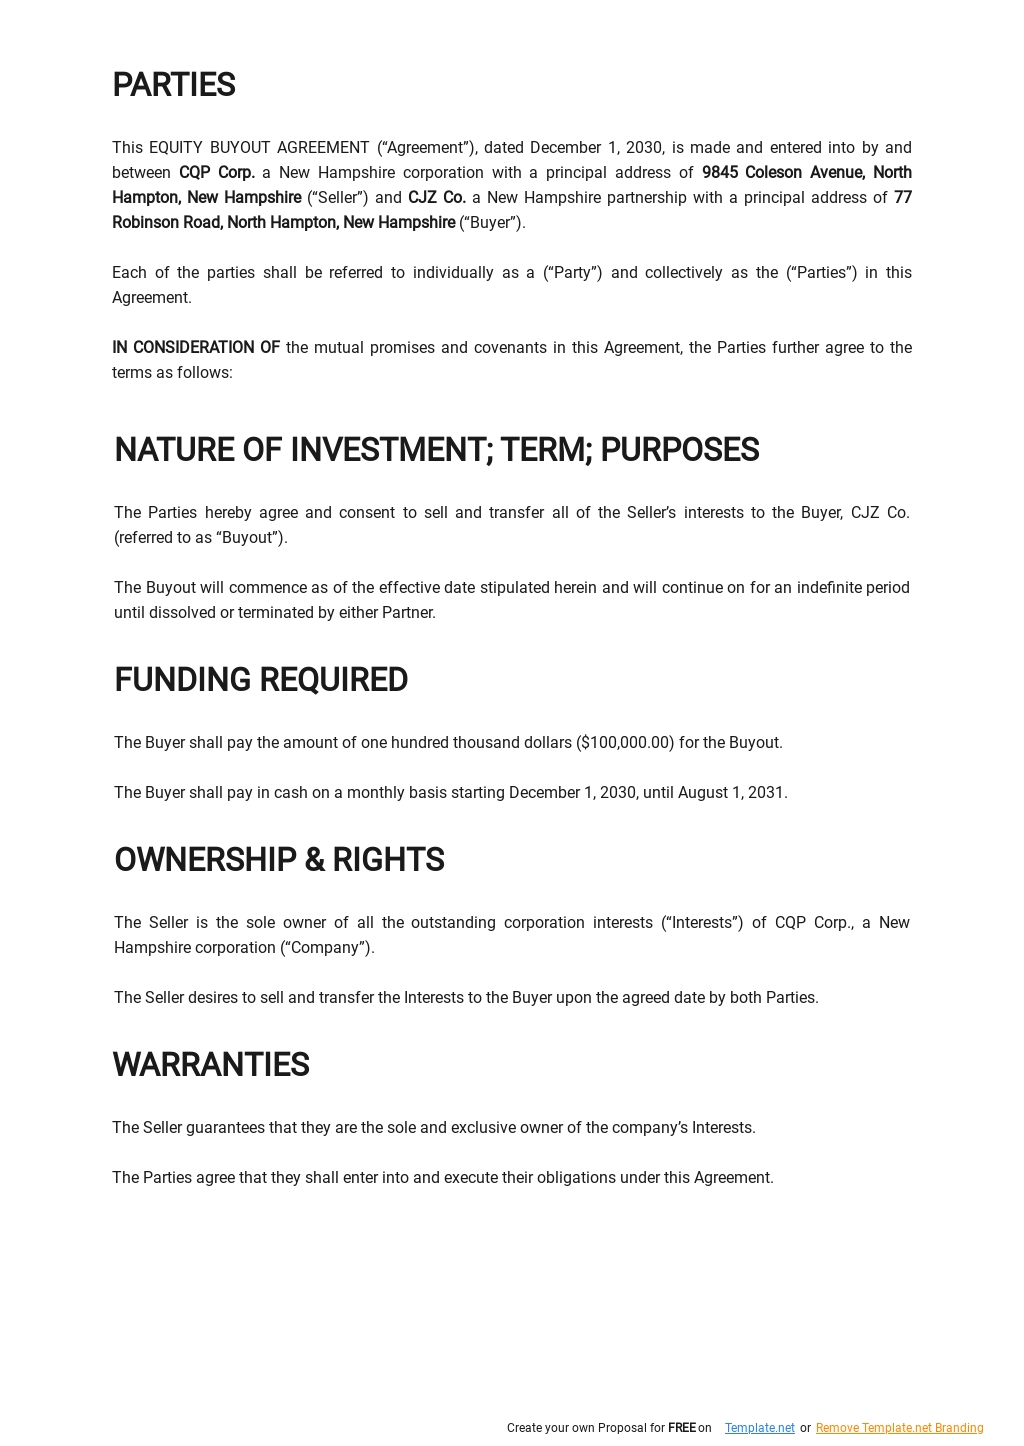 Equity Buyout Agreement Template 1.jpe